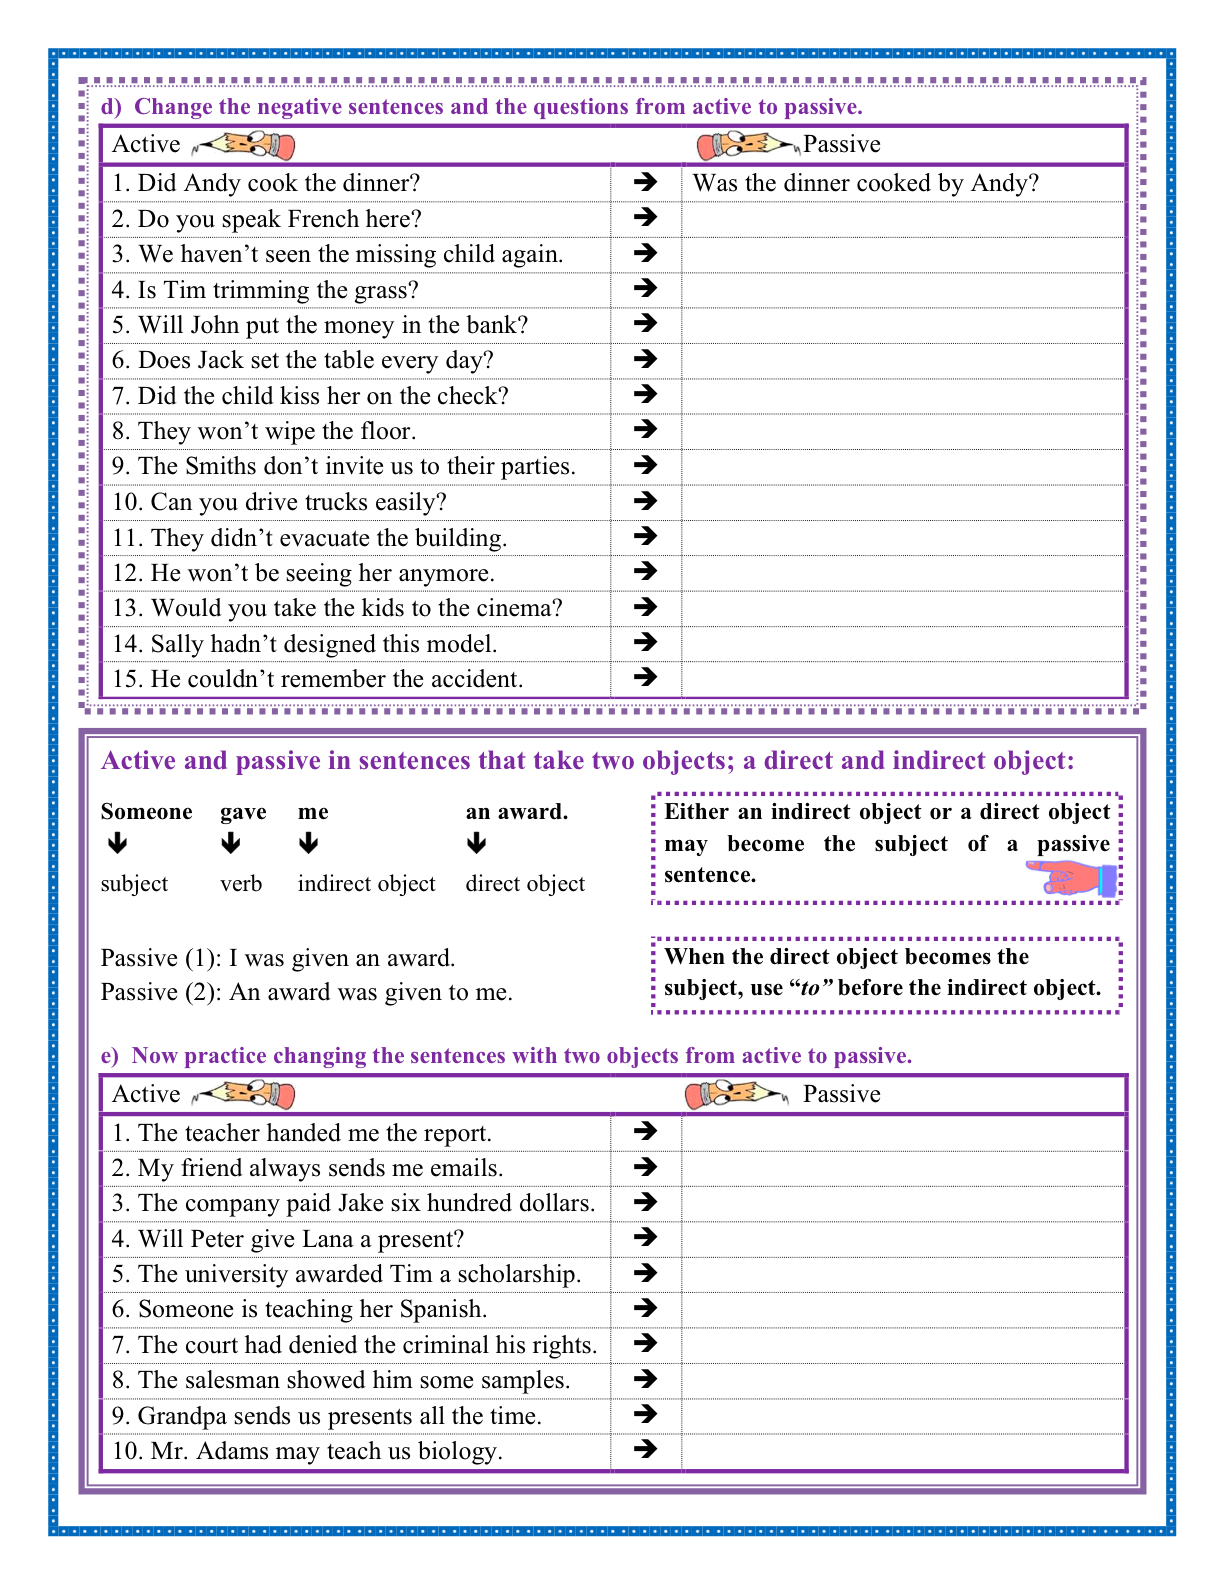 english-grammar-mixed-tenses-exercises-with-answers-doc-emanuel-hill-s-reading-worksheets